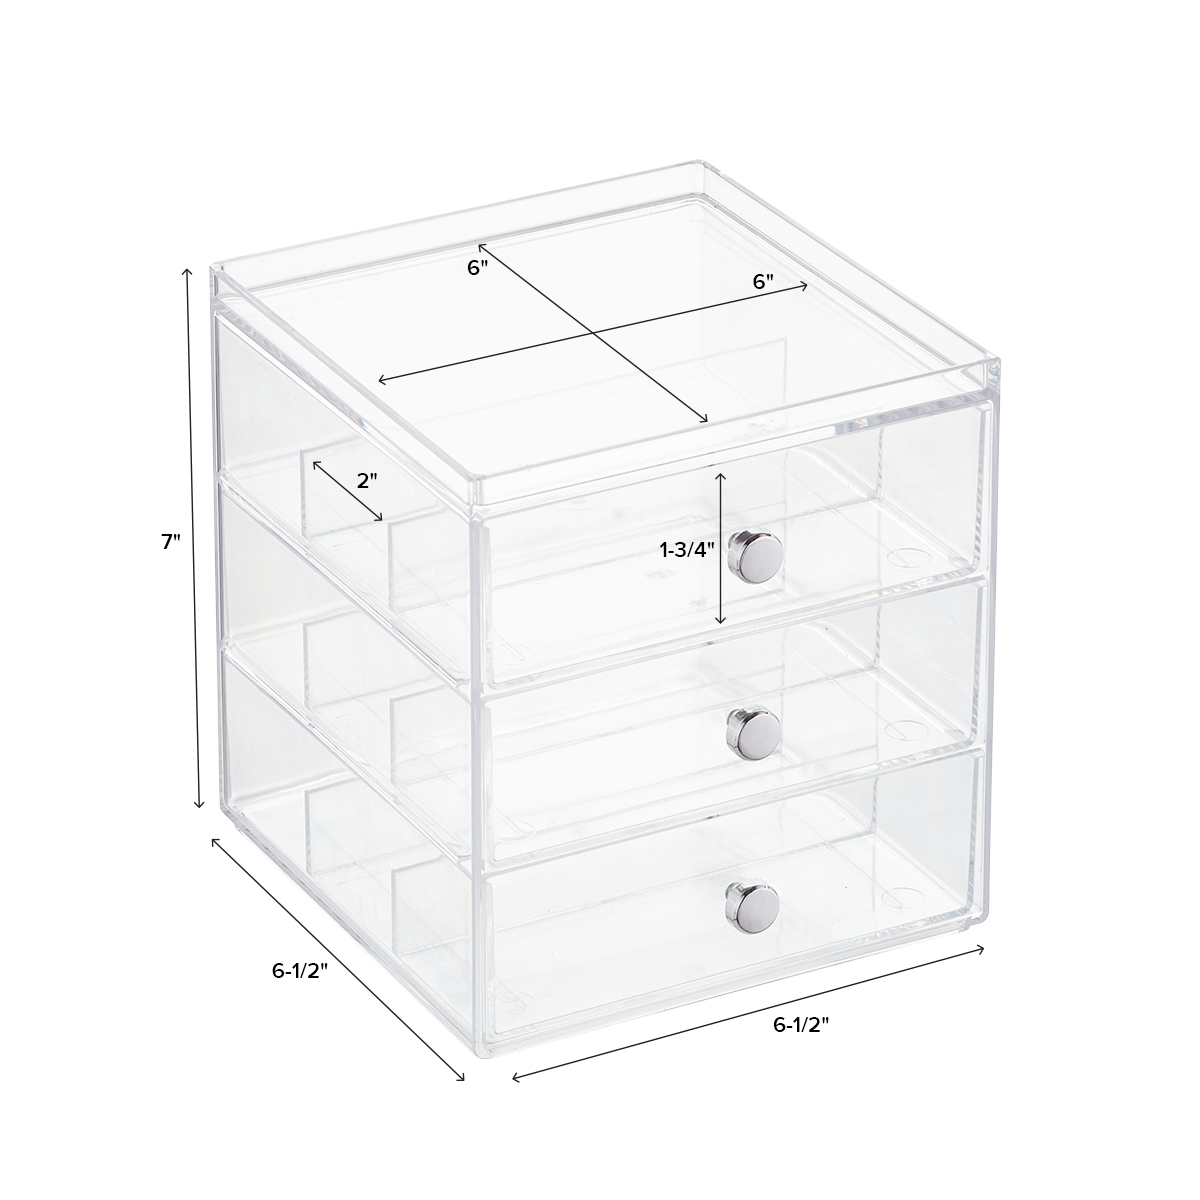 https://www.containerstore.com/catalogimages/449441/10064433-clarity-3-drawer-divided-st.jpg